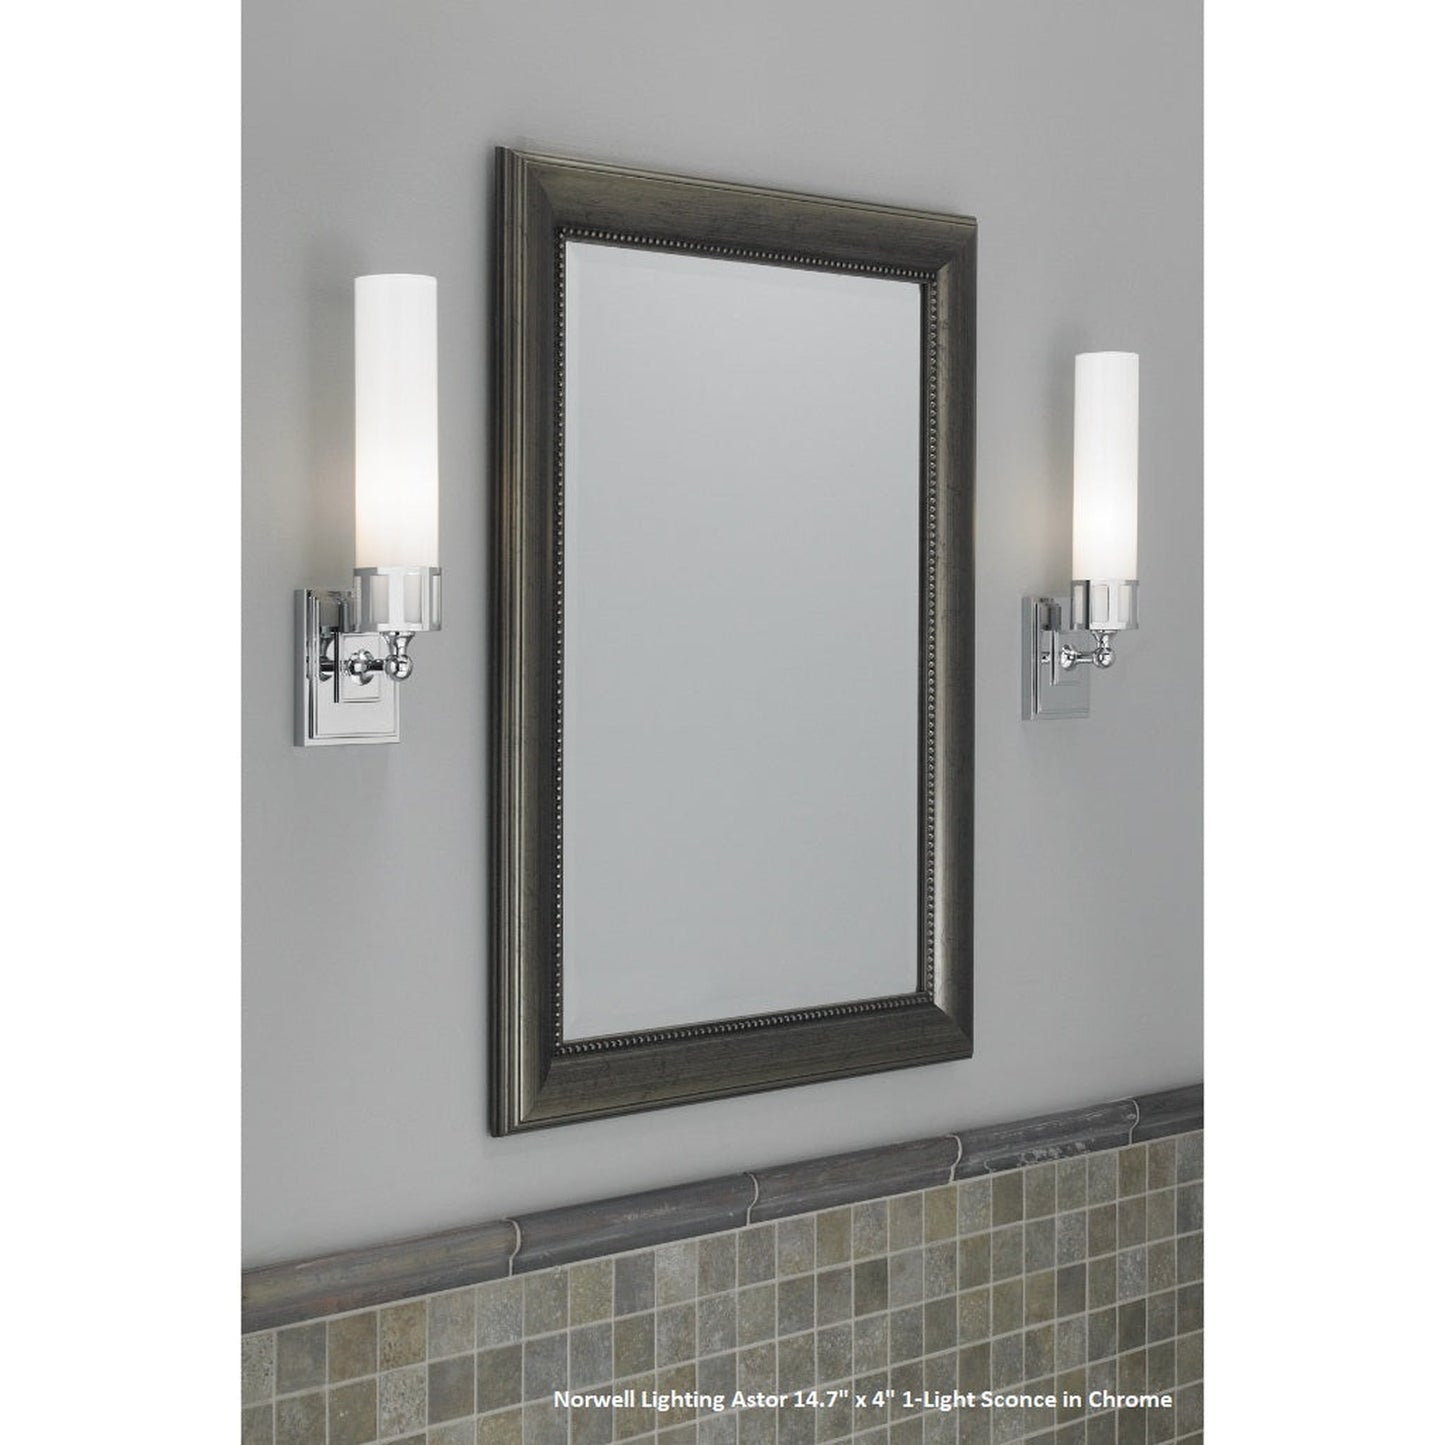 Norwell Lighting Astor 15" x 4" 1-Light Chrome Horizontal/Vertical LED Vanity Wall Sconce With Shiny Opal Glass Diffuser